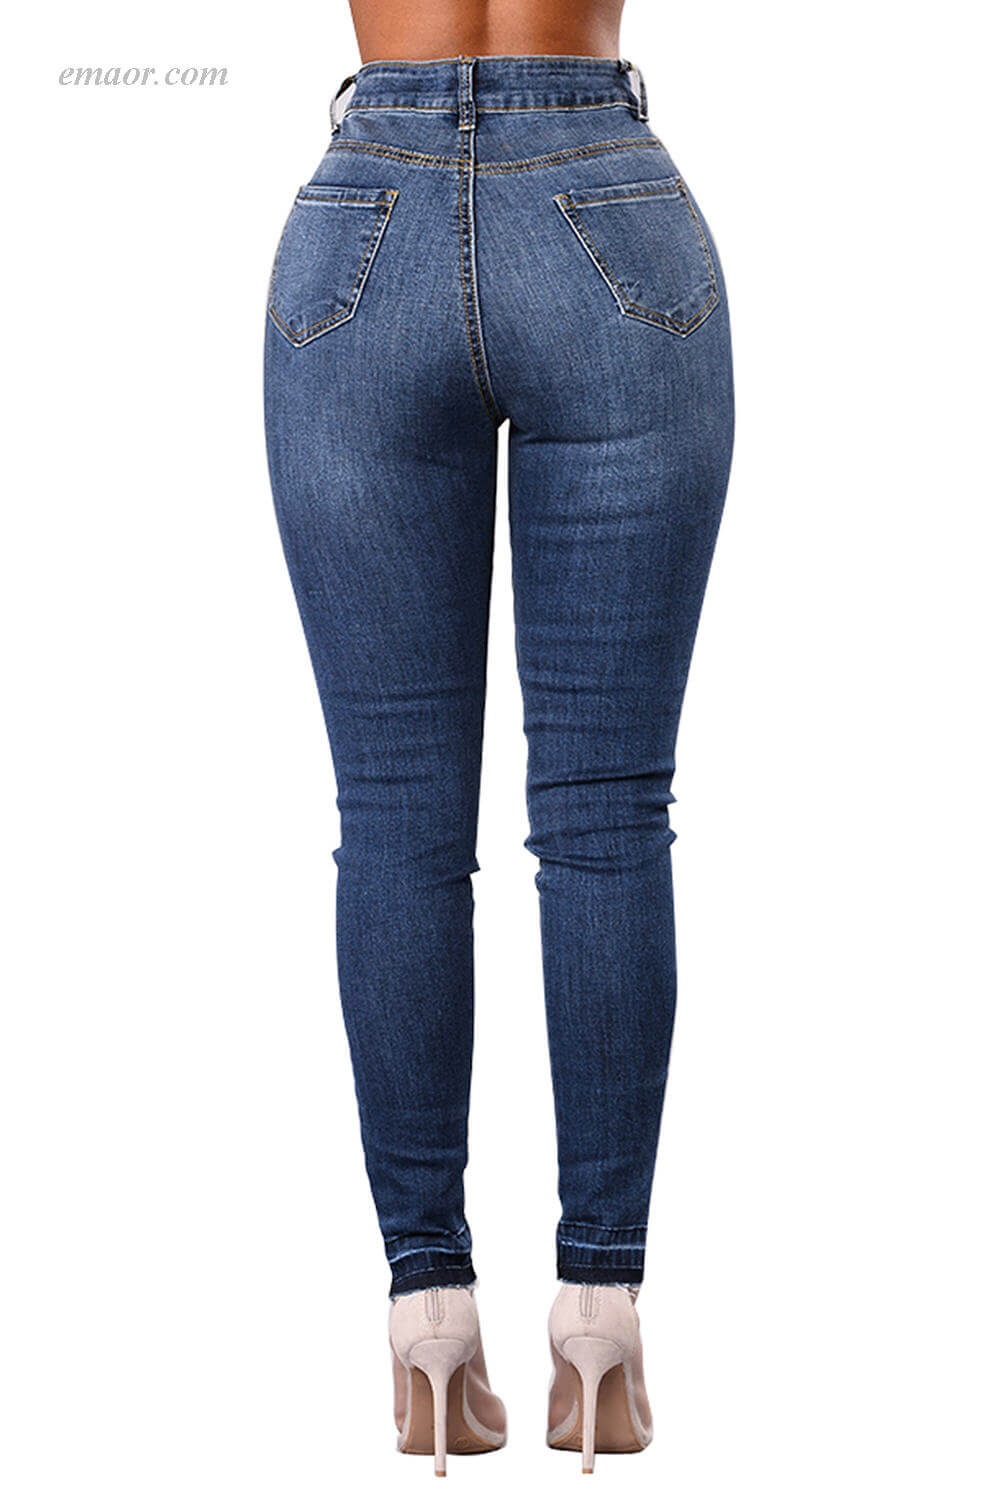 Hot Women‘s Dividual Patched Ripped Skinny Jeans Online 